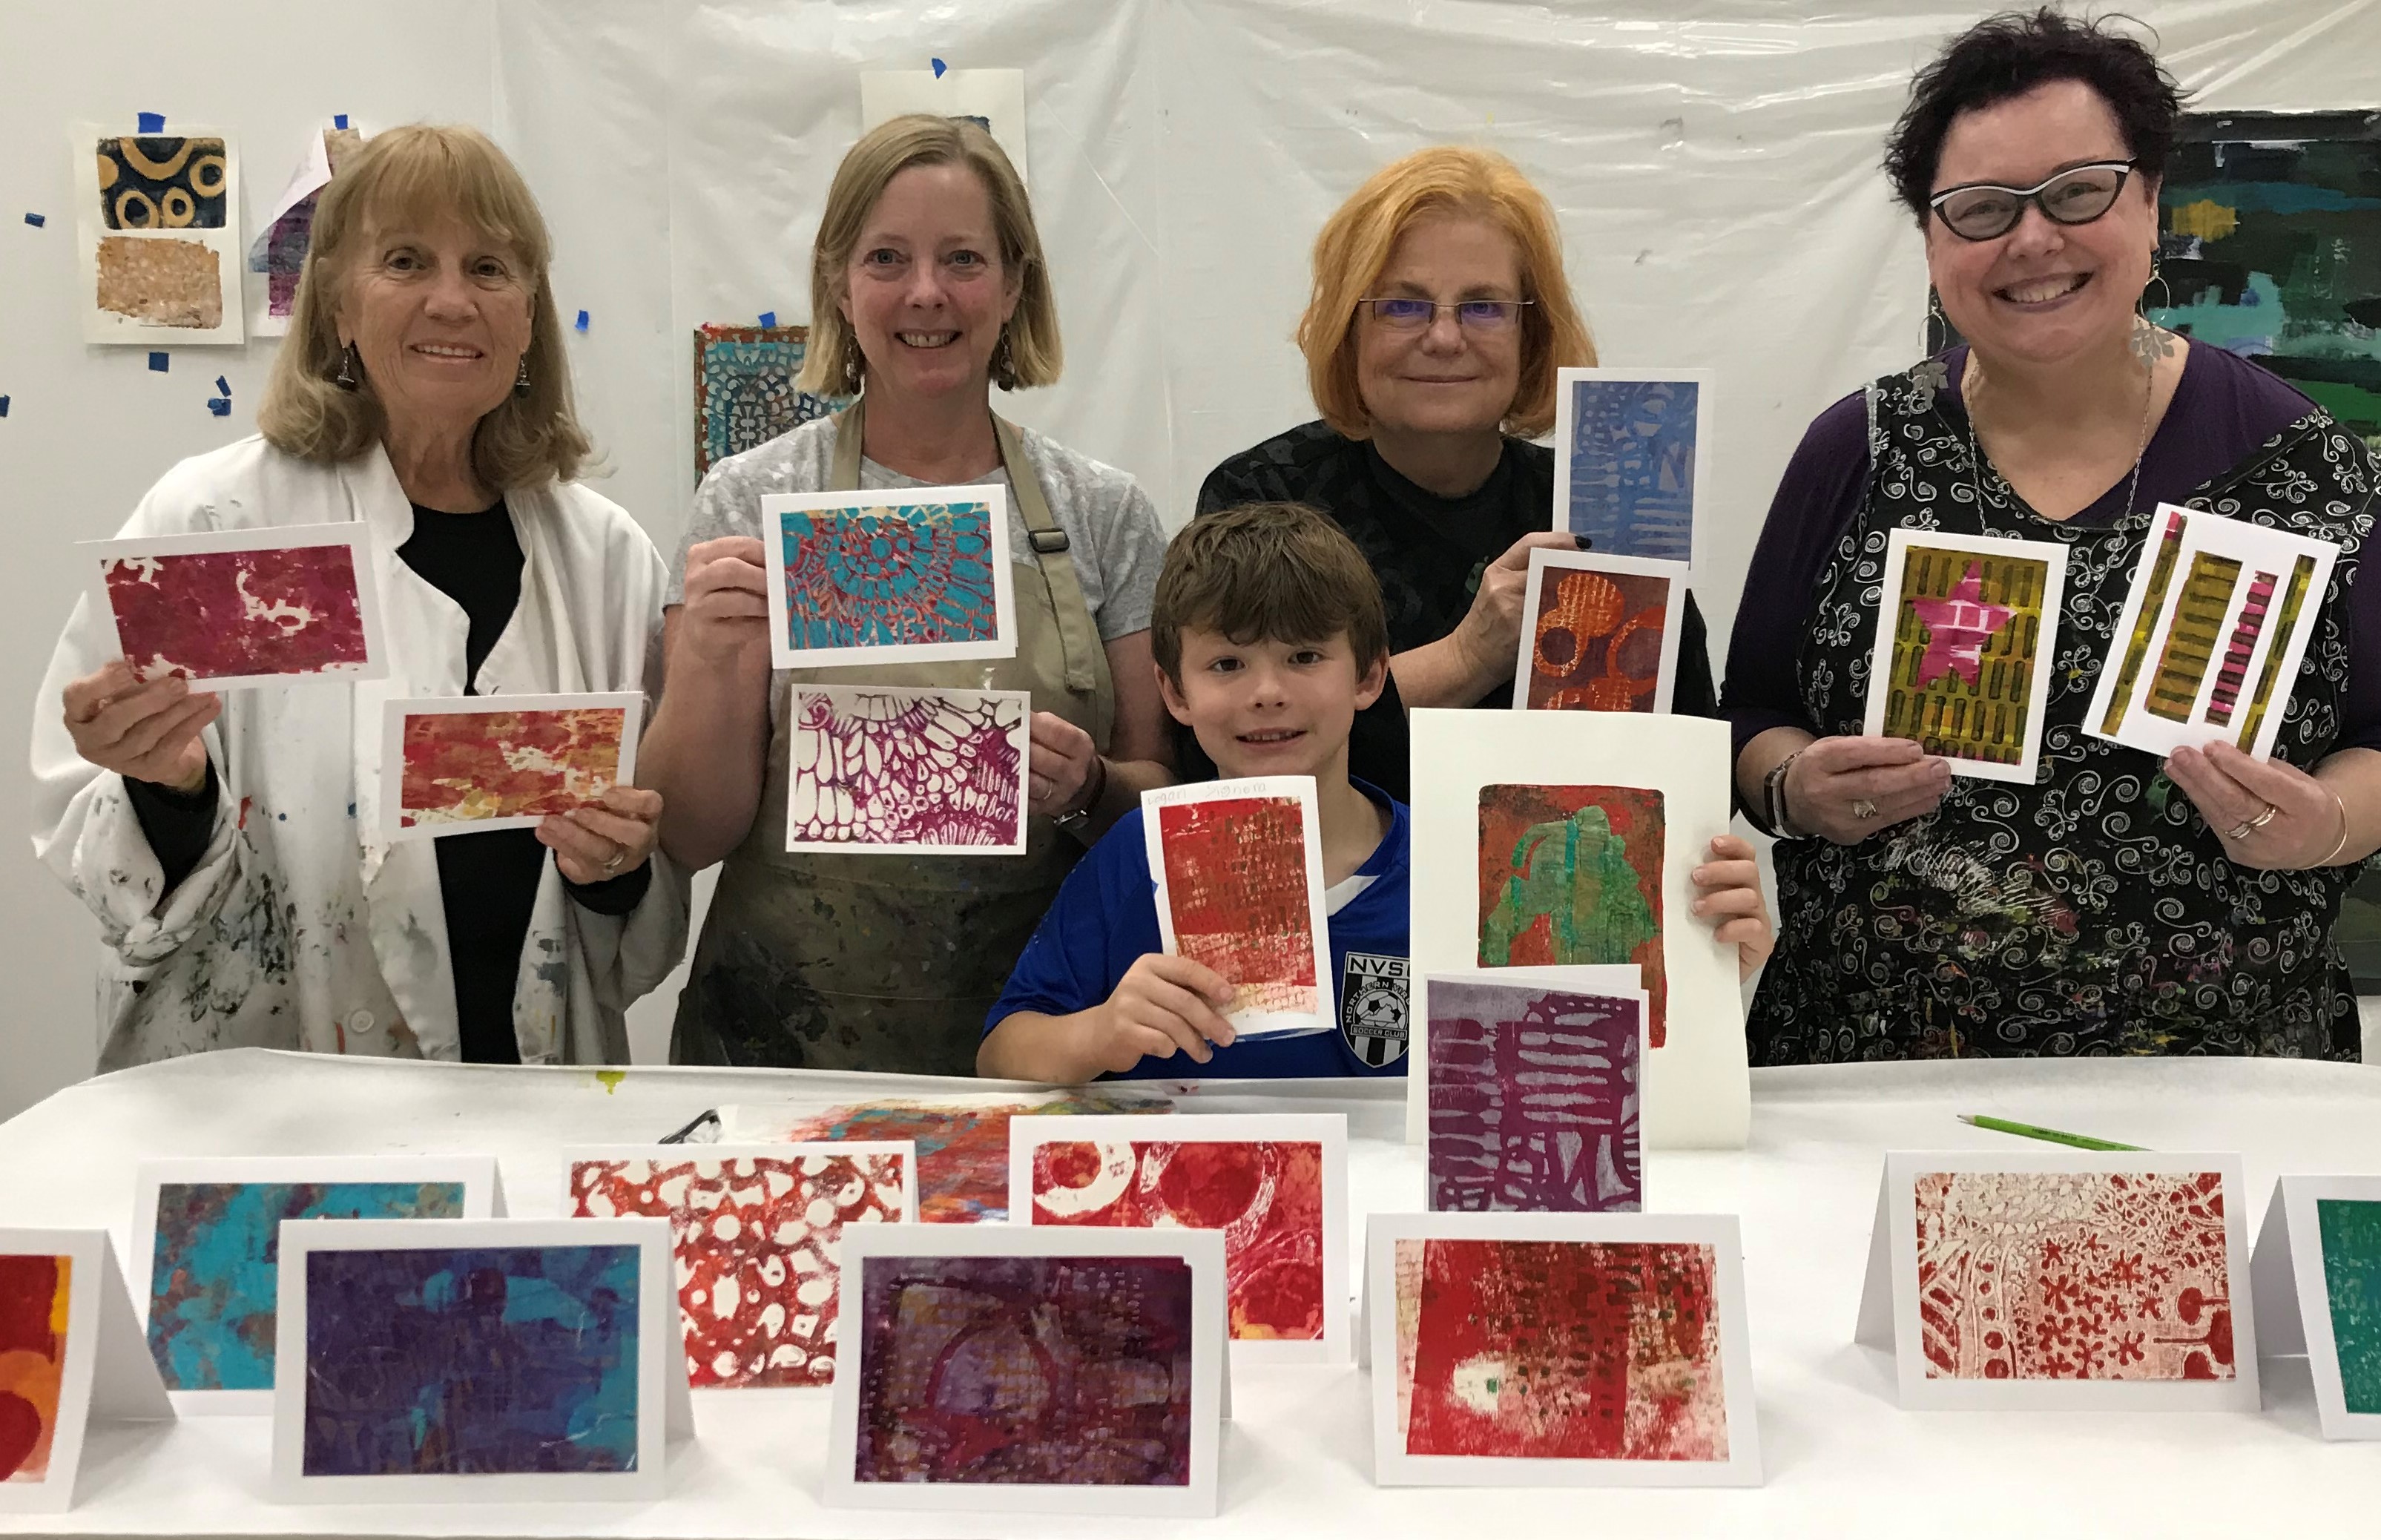 Gel Printing: Make Your Own Greeting Cards